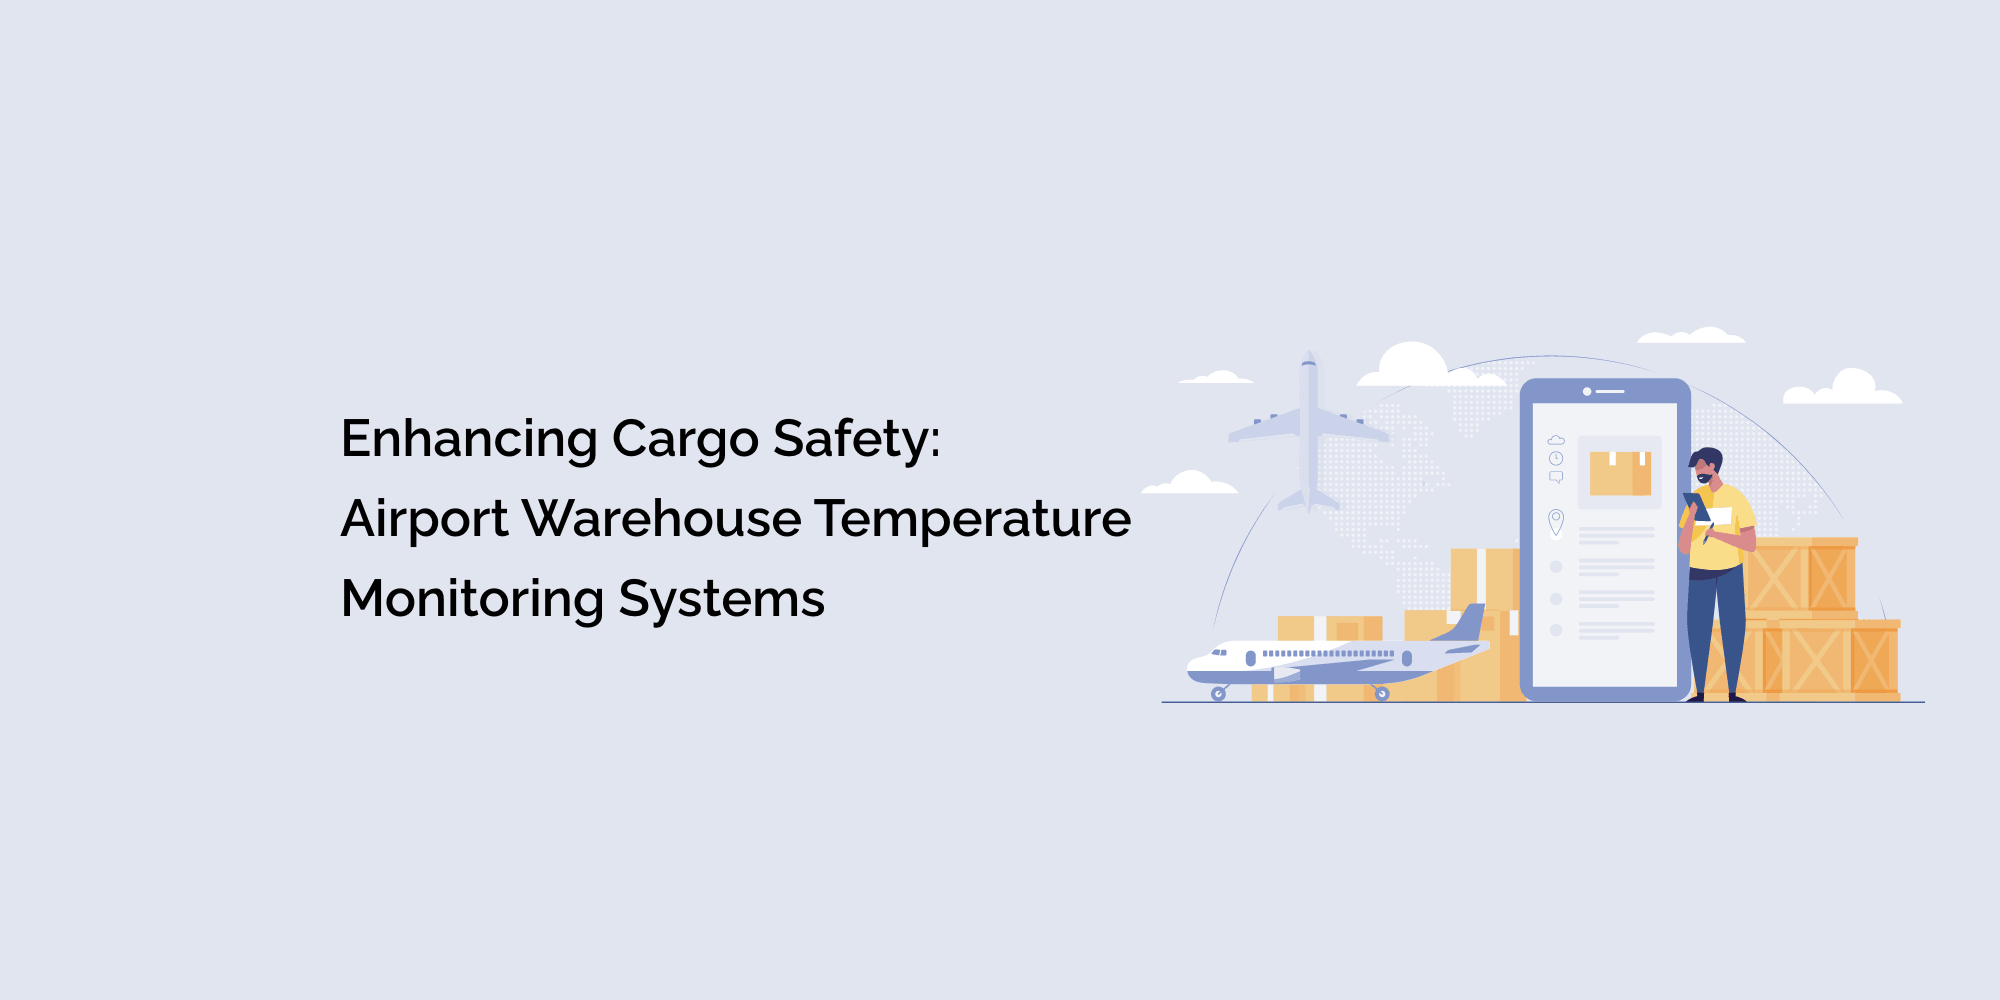 Enhancing Cargo Safety: Airport Warehouse Temperature Monitoring Systems